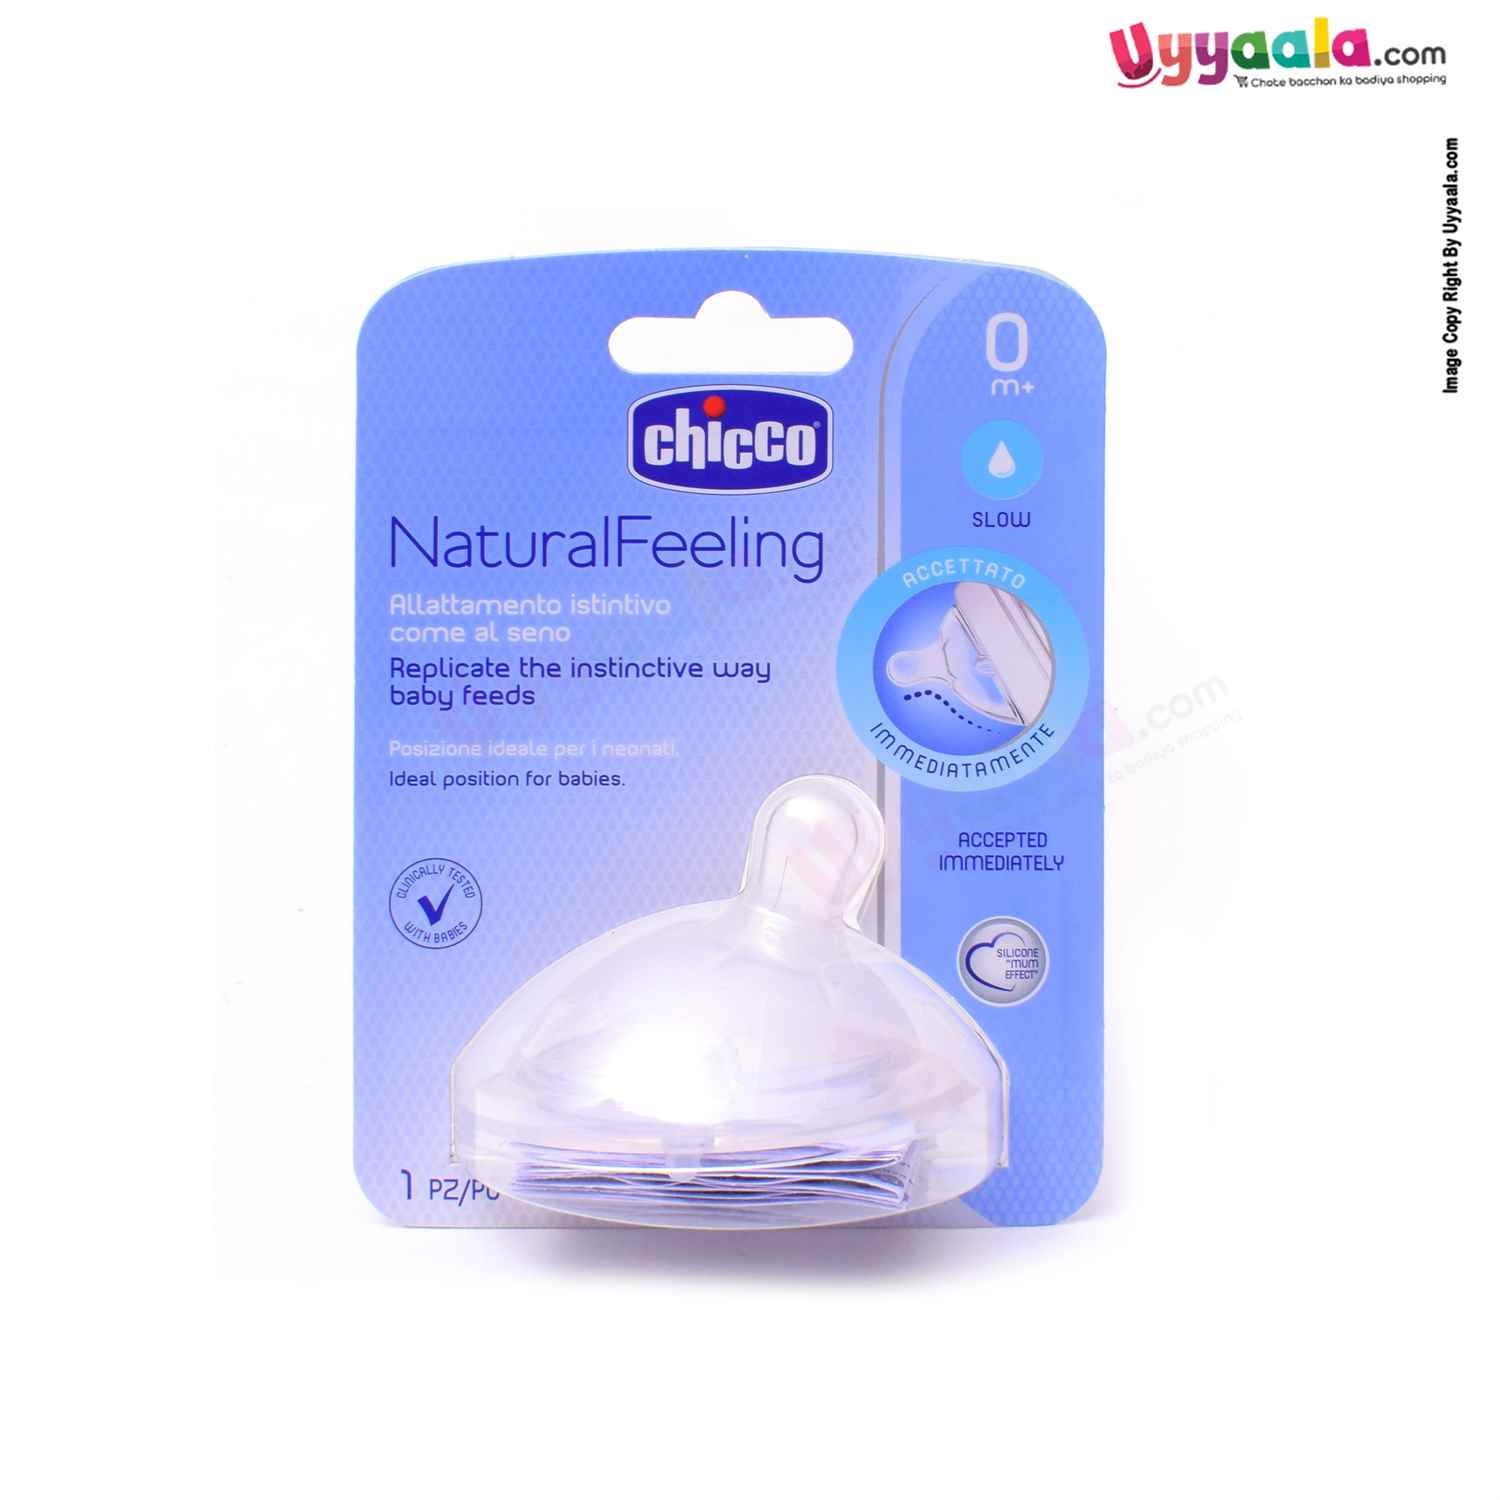 White Baby Feeding Silicone Nipple, 3 Months at Rs 4/piece in Mumbai